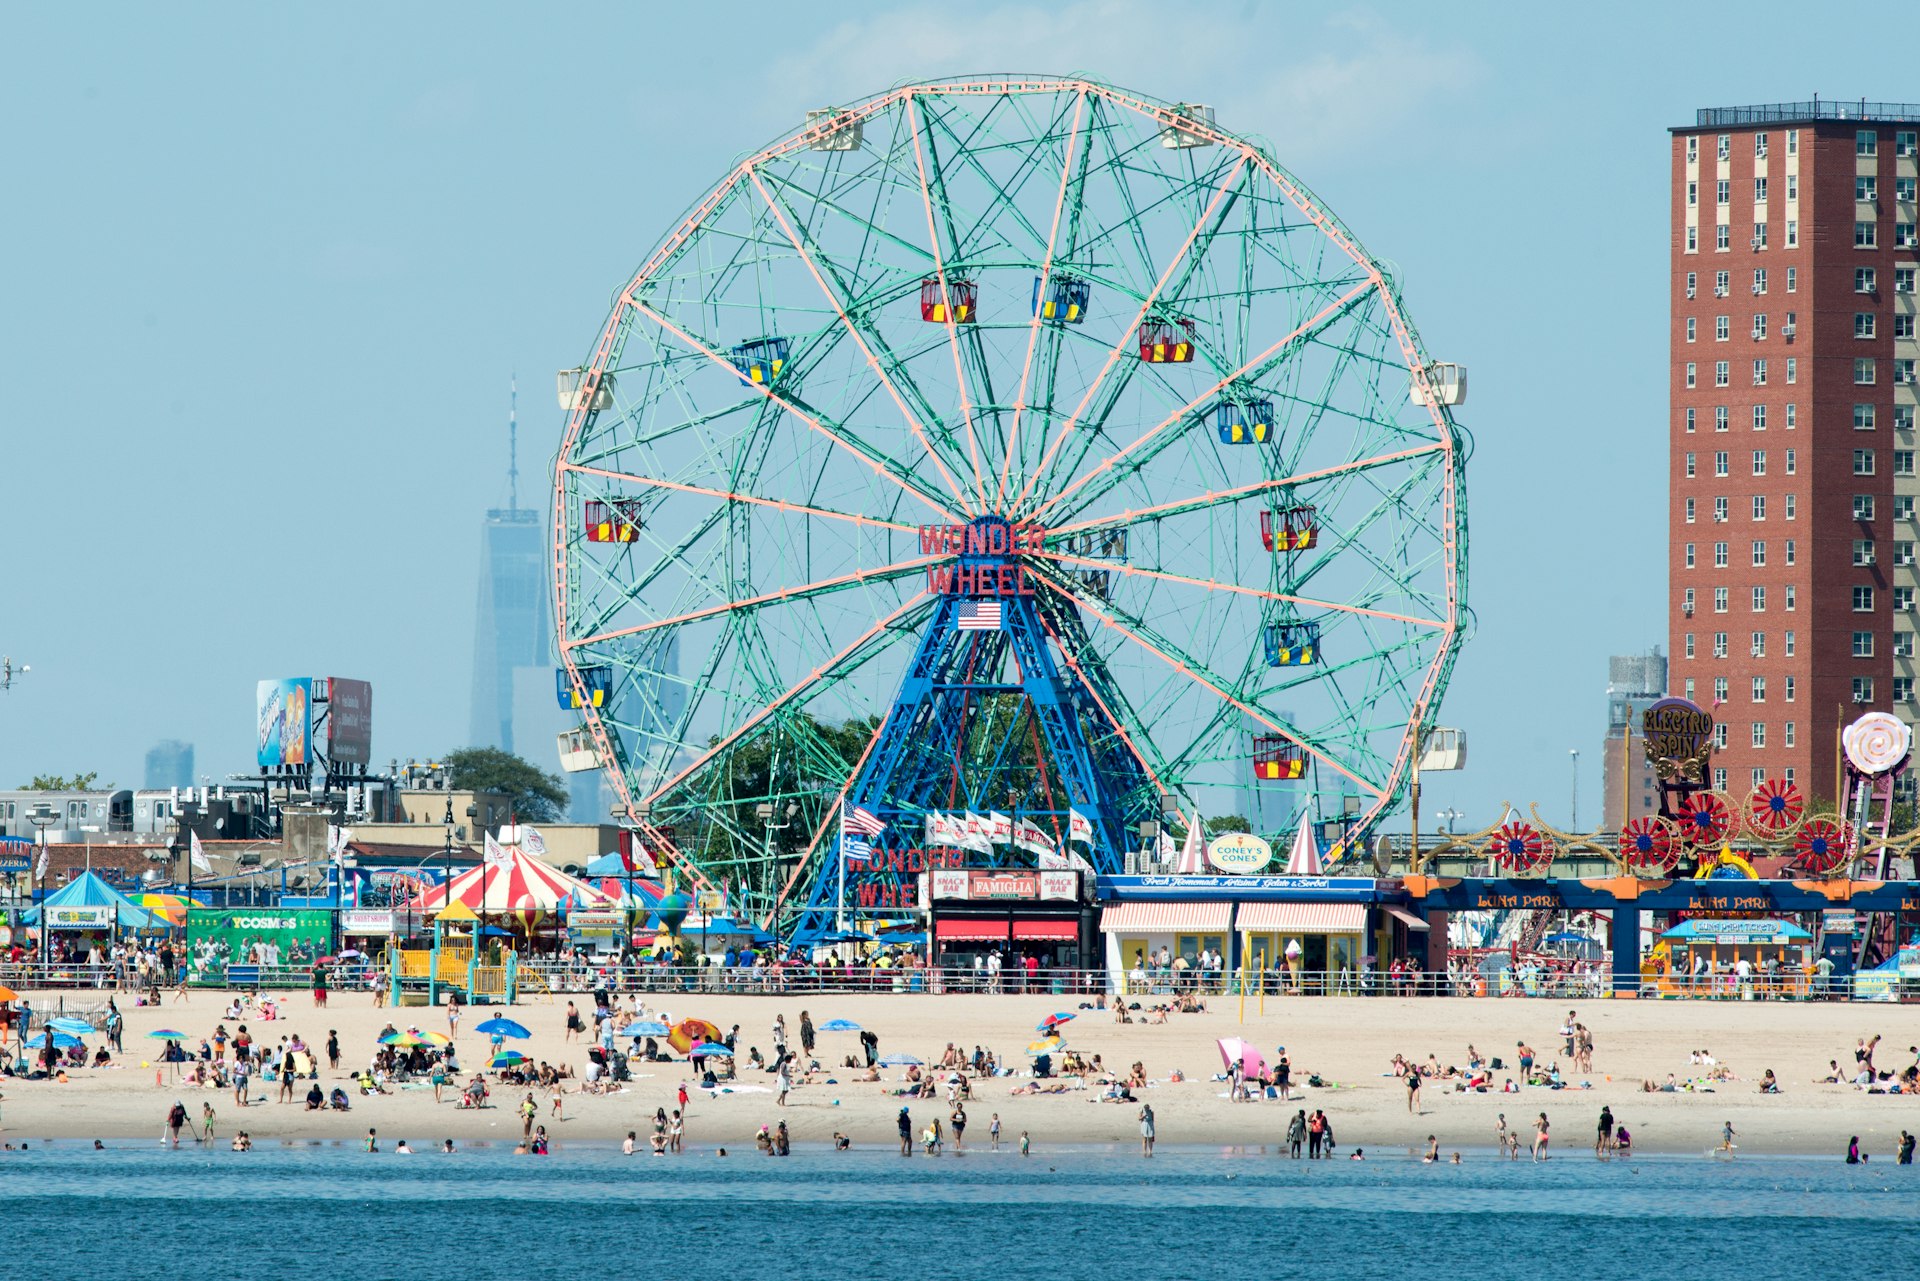 The Wonder Wheel and busy beach at Coney Island, New York, as seen from the water